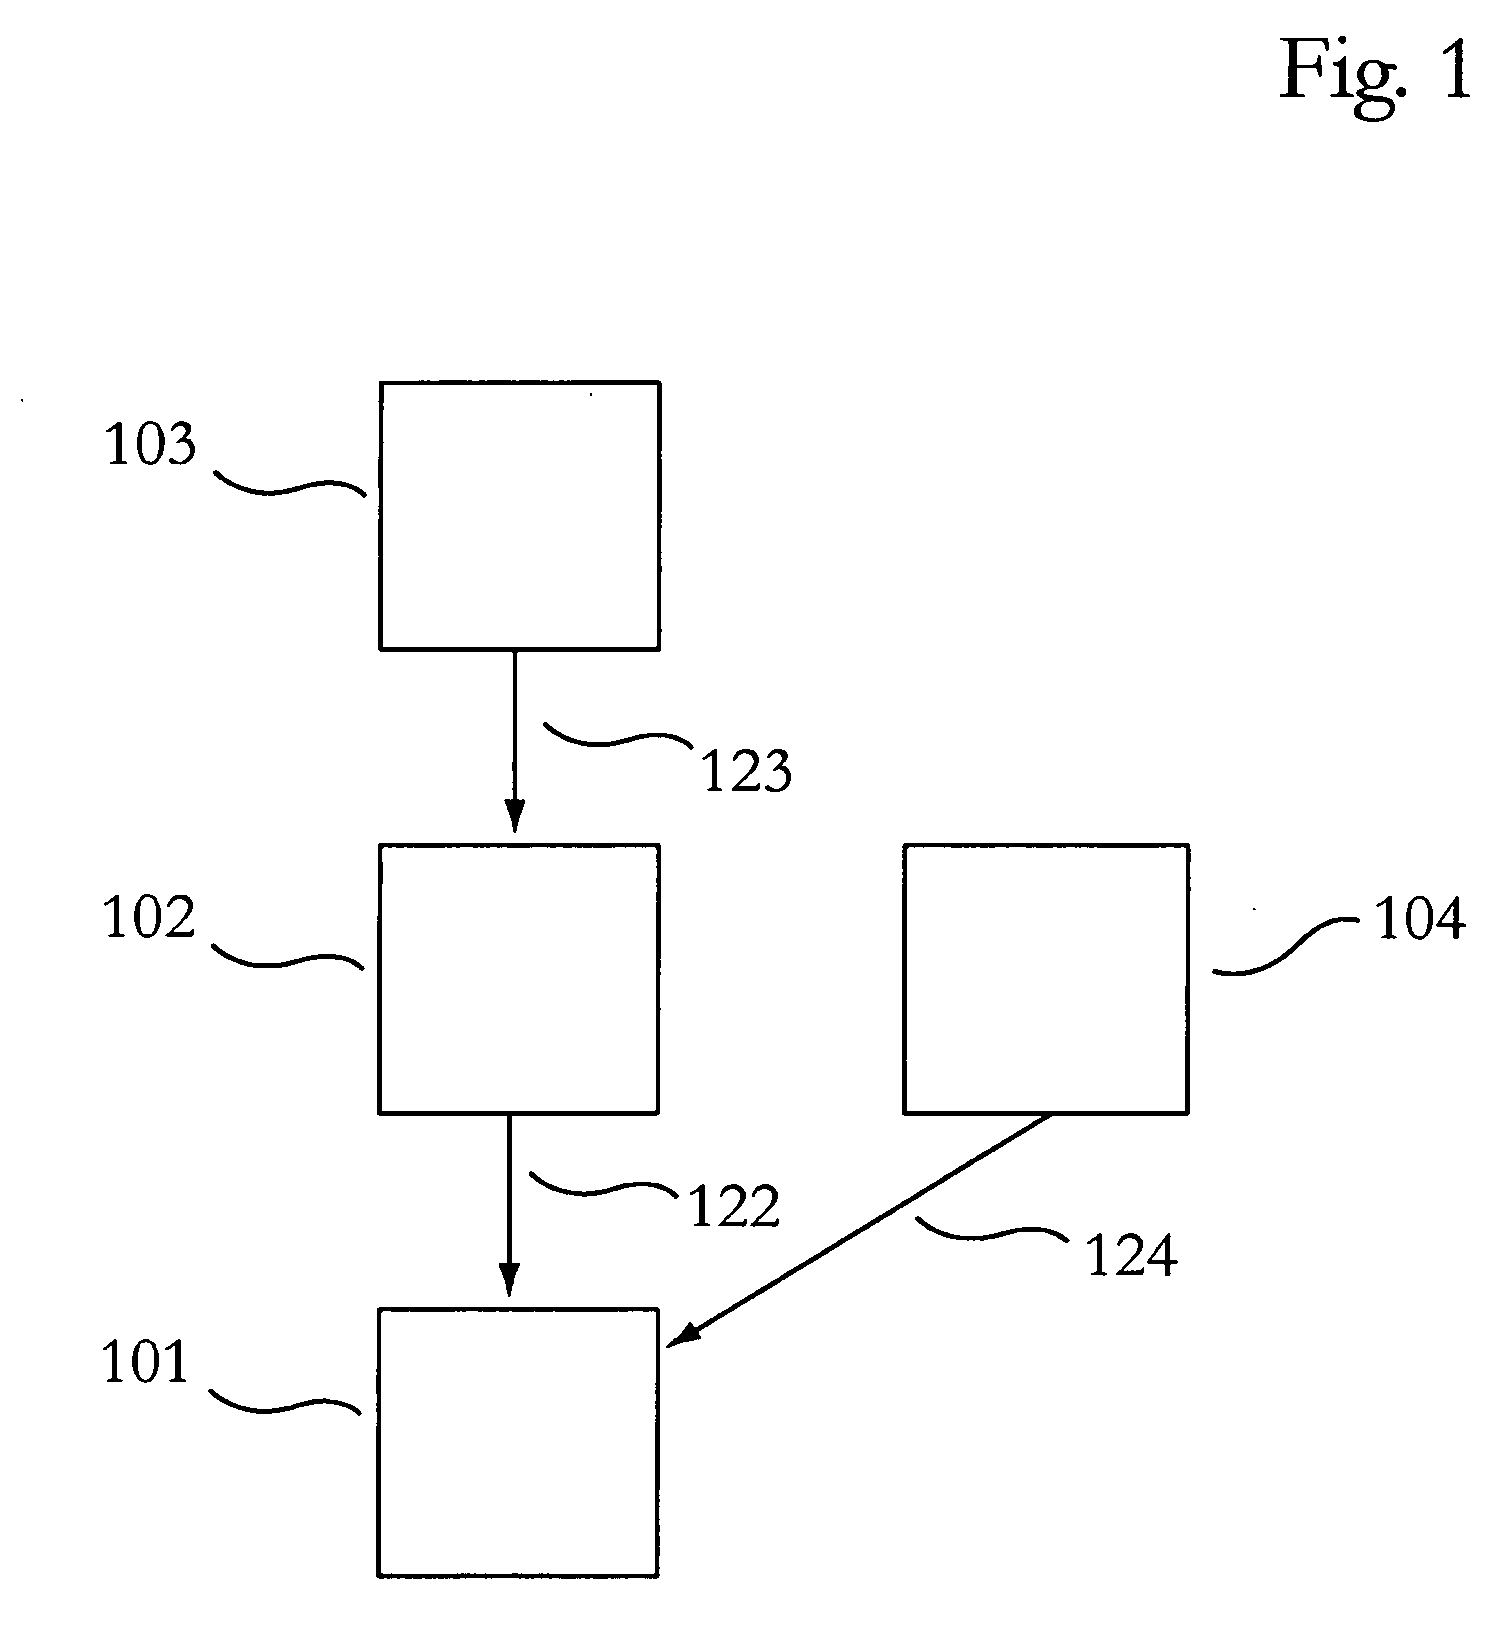 System and method for minimizing transfer of motion picture data manipulated with outsourced labor